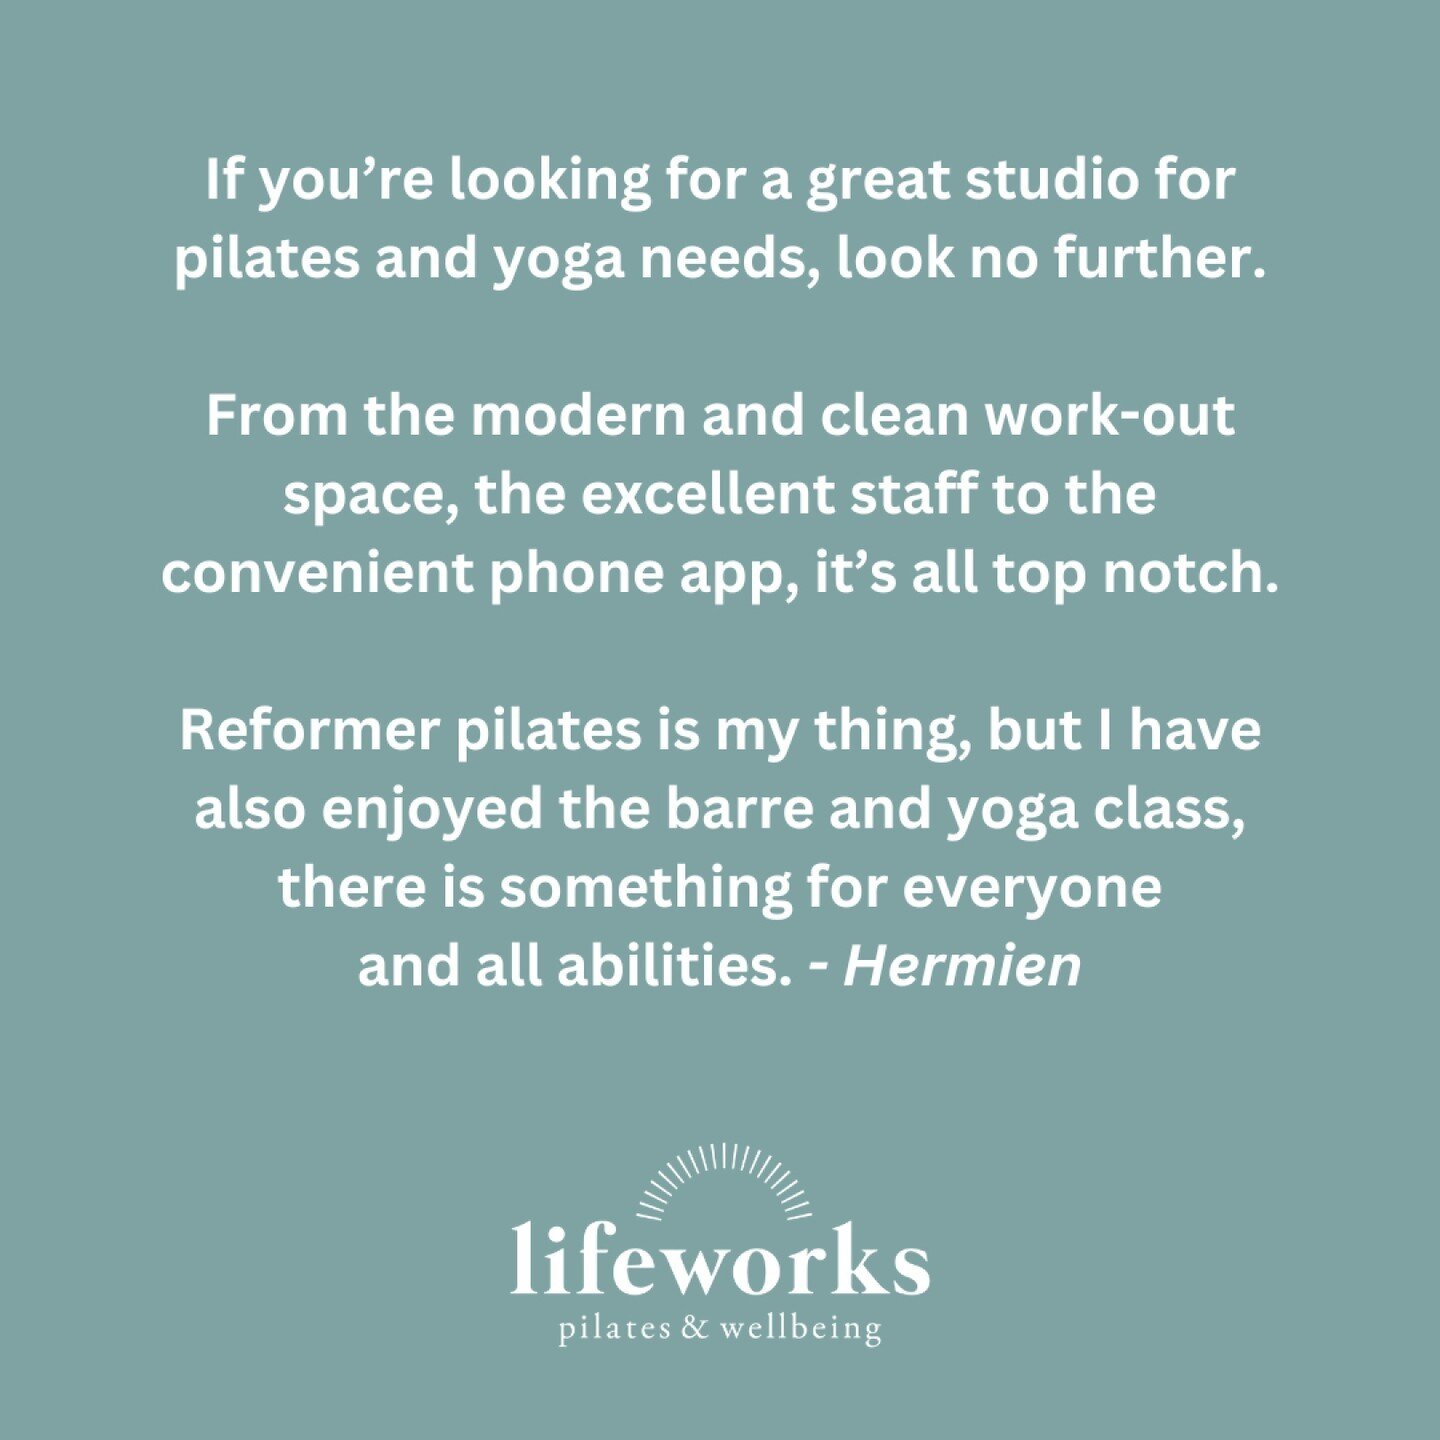 We strive for high quality and excellence across the studio, so that we can offer our clients the best possible experience! 

#pilates #lifeworkspilates #reformerpilates #clinicalpilates #theballinawave #discoverballina #ballinanow #eastballina #suff